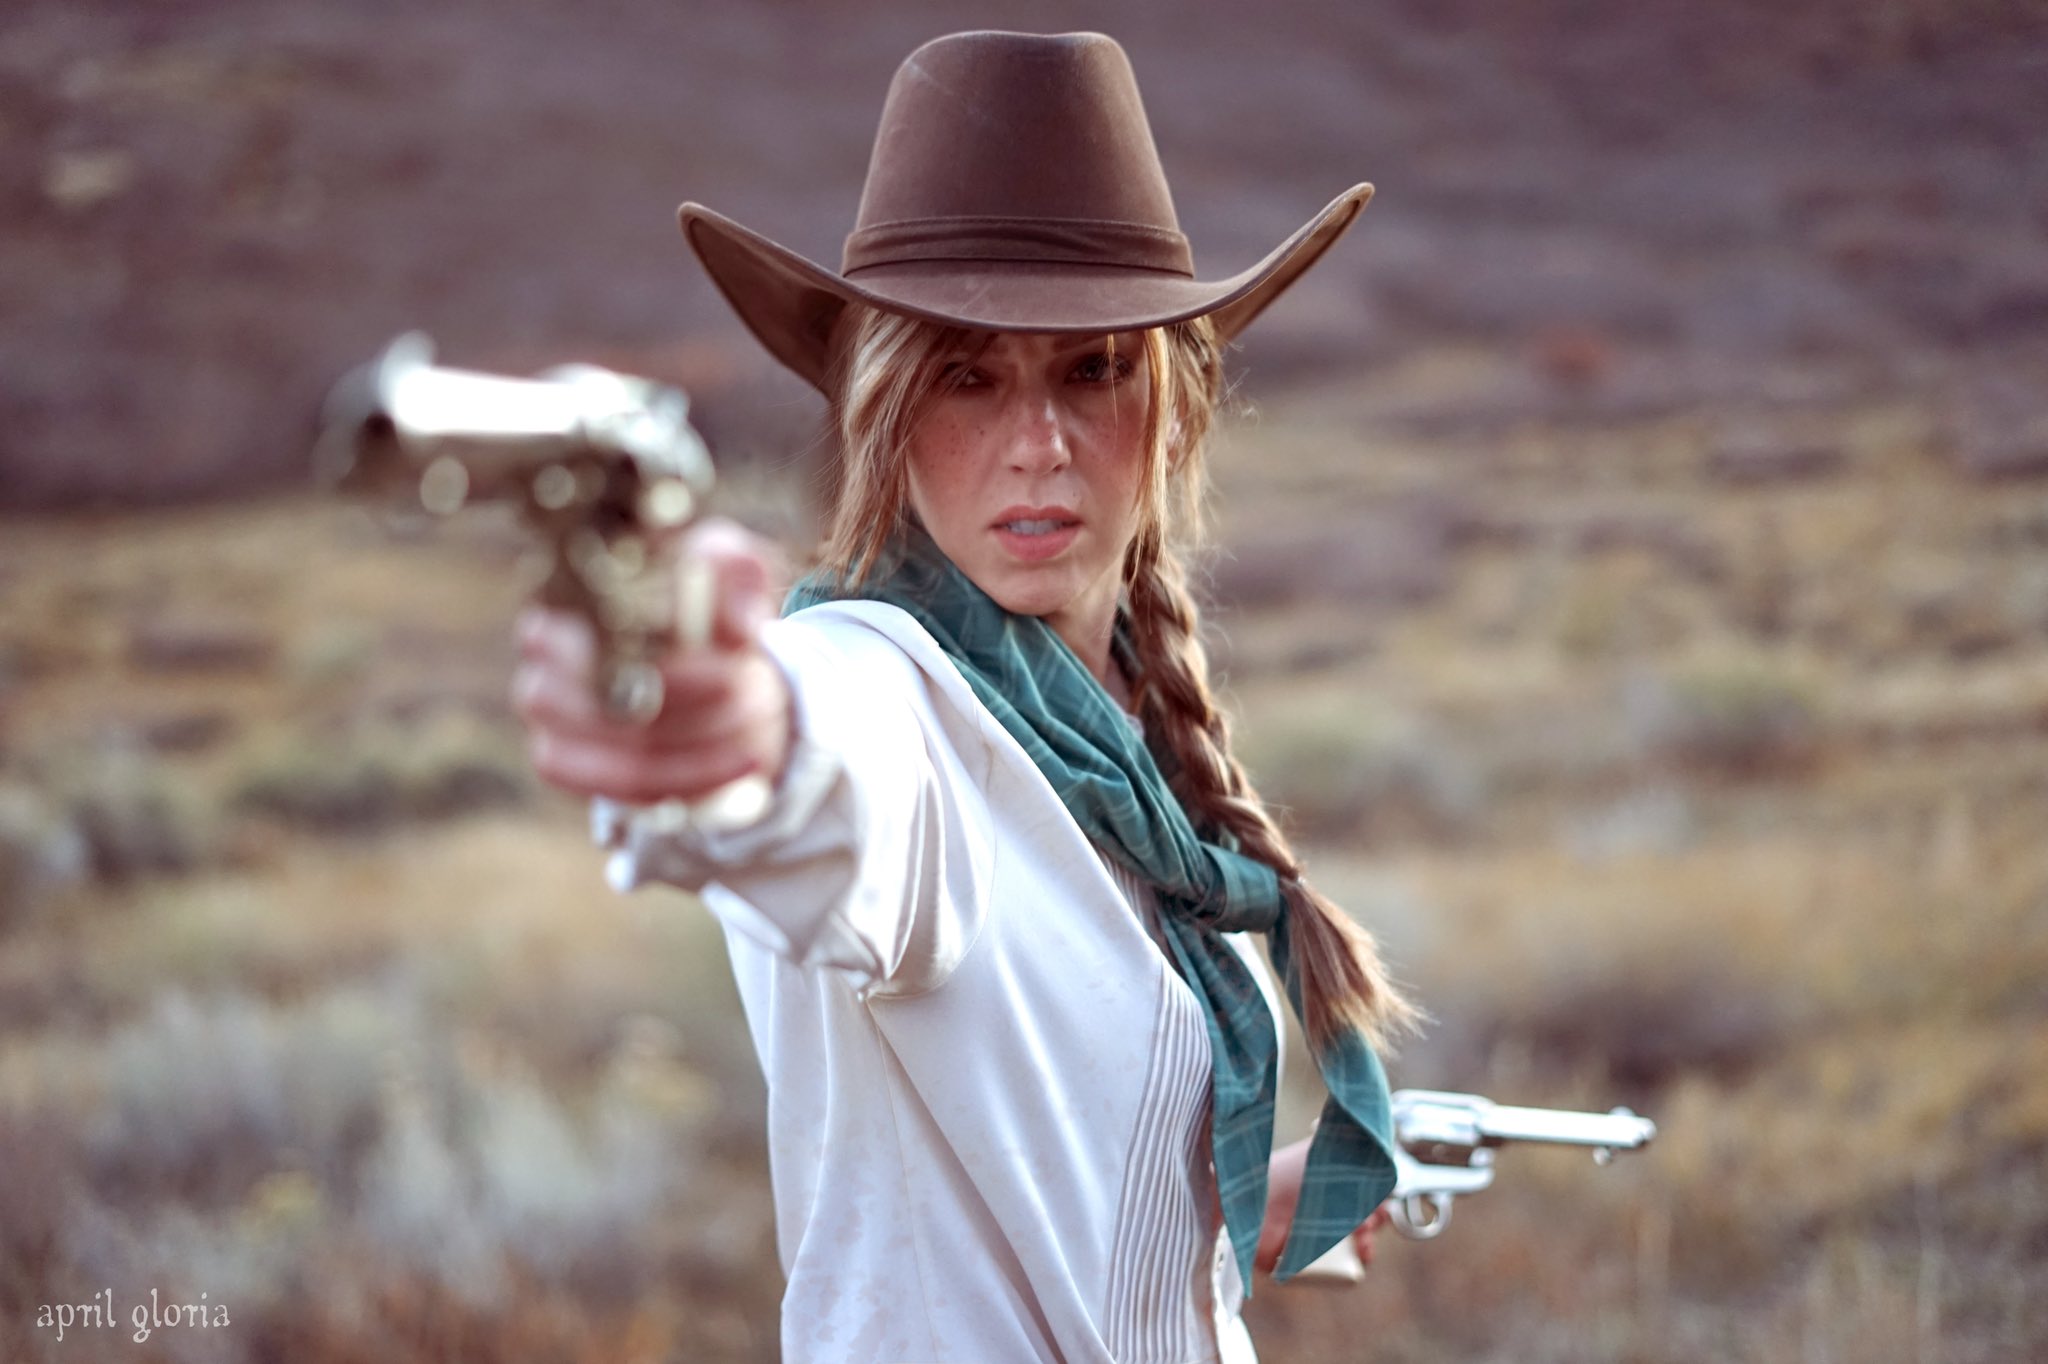 At hoppe Sow titel Rockstar Games on X: "RT @_aprilgloria: she SHOOT 🤠 Sadie Adler - Red Dead  Redemption 2 Photo by CG edit by me https://t.co/hdwUUB3FAO" / X